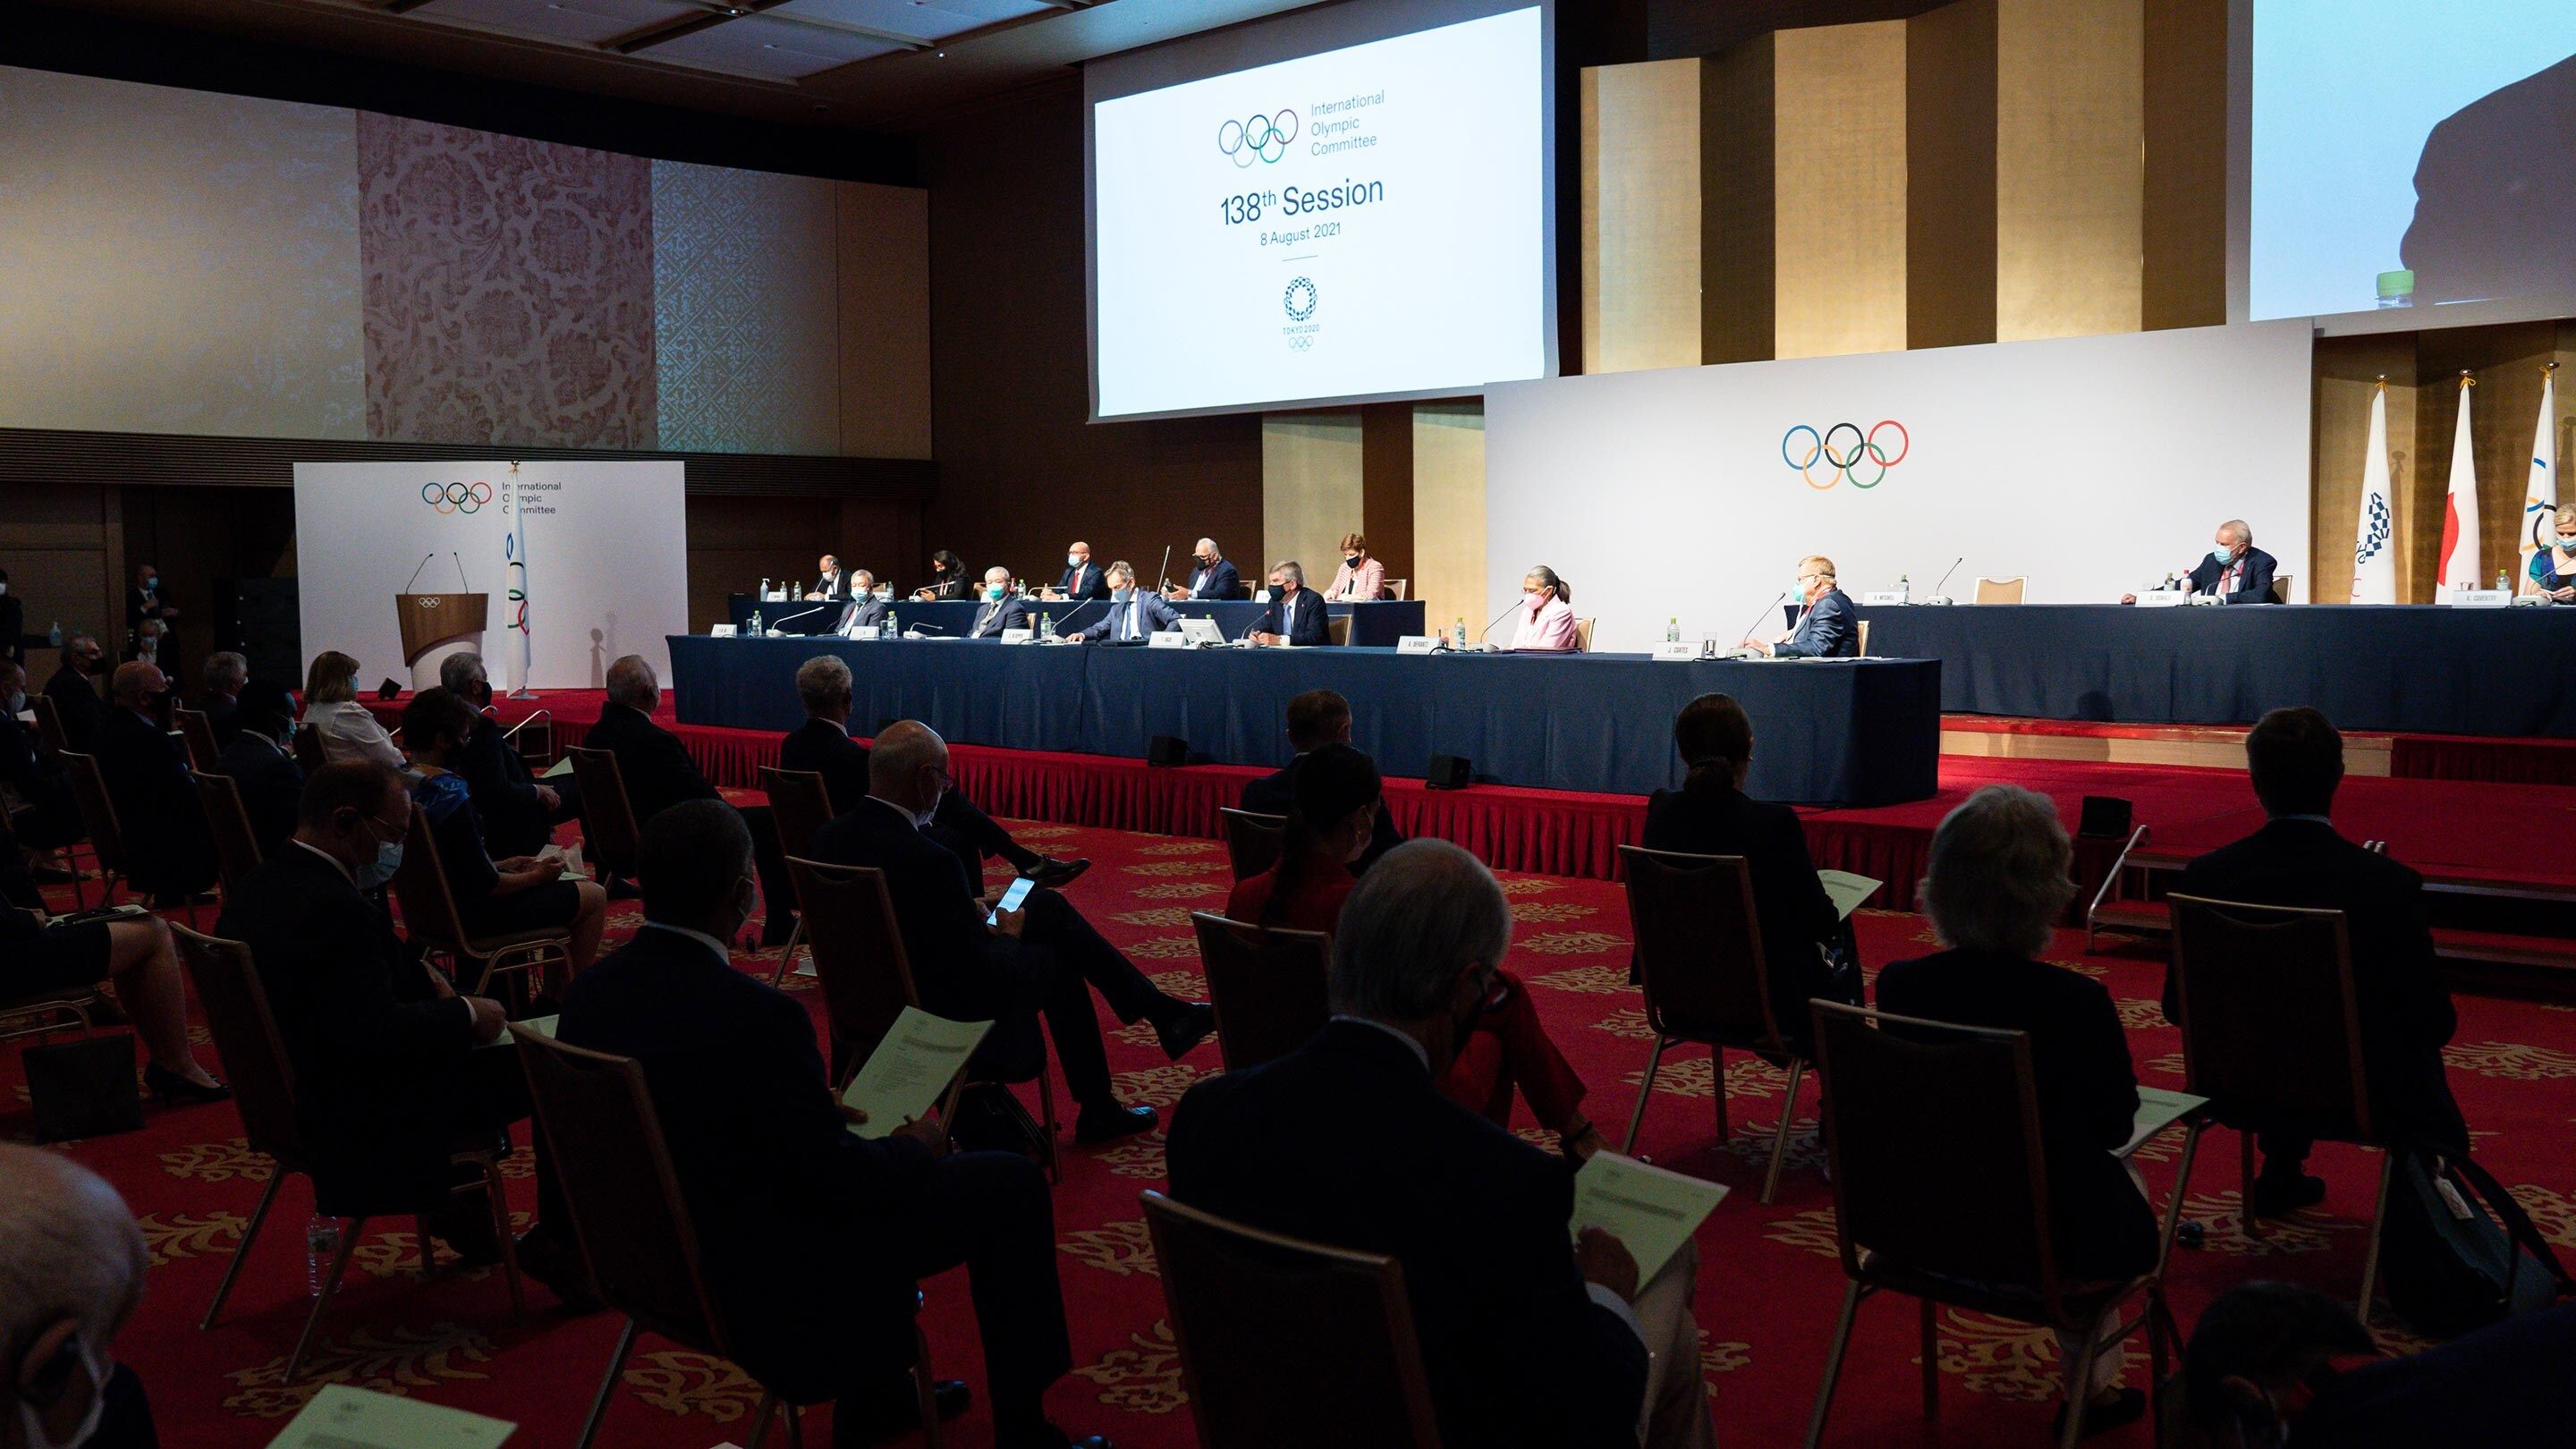 New IOC members elected, Tokyo 2020 organizers praised as IOC session ends